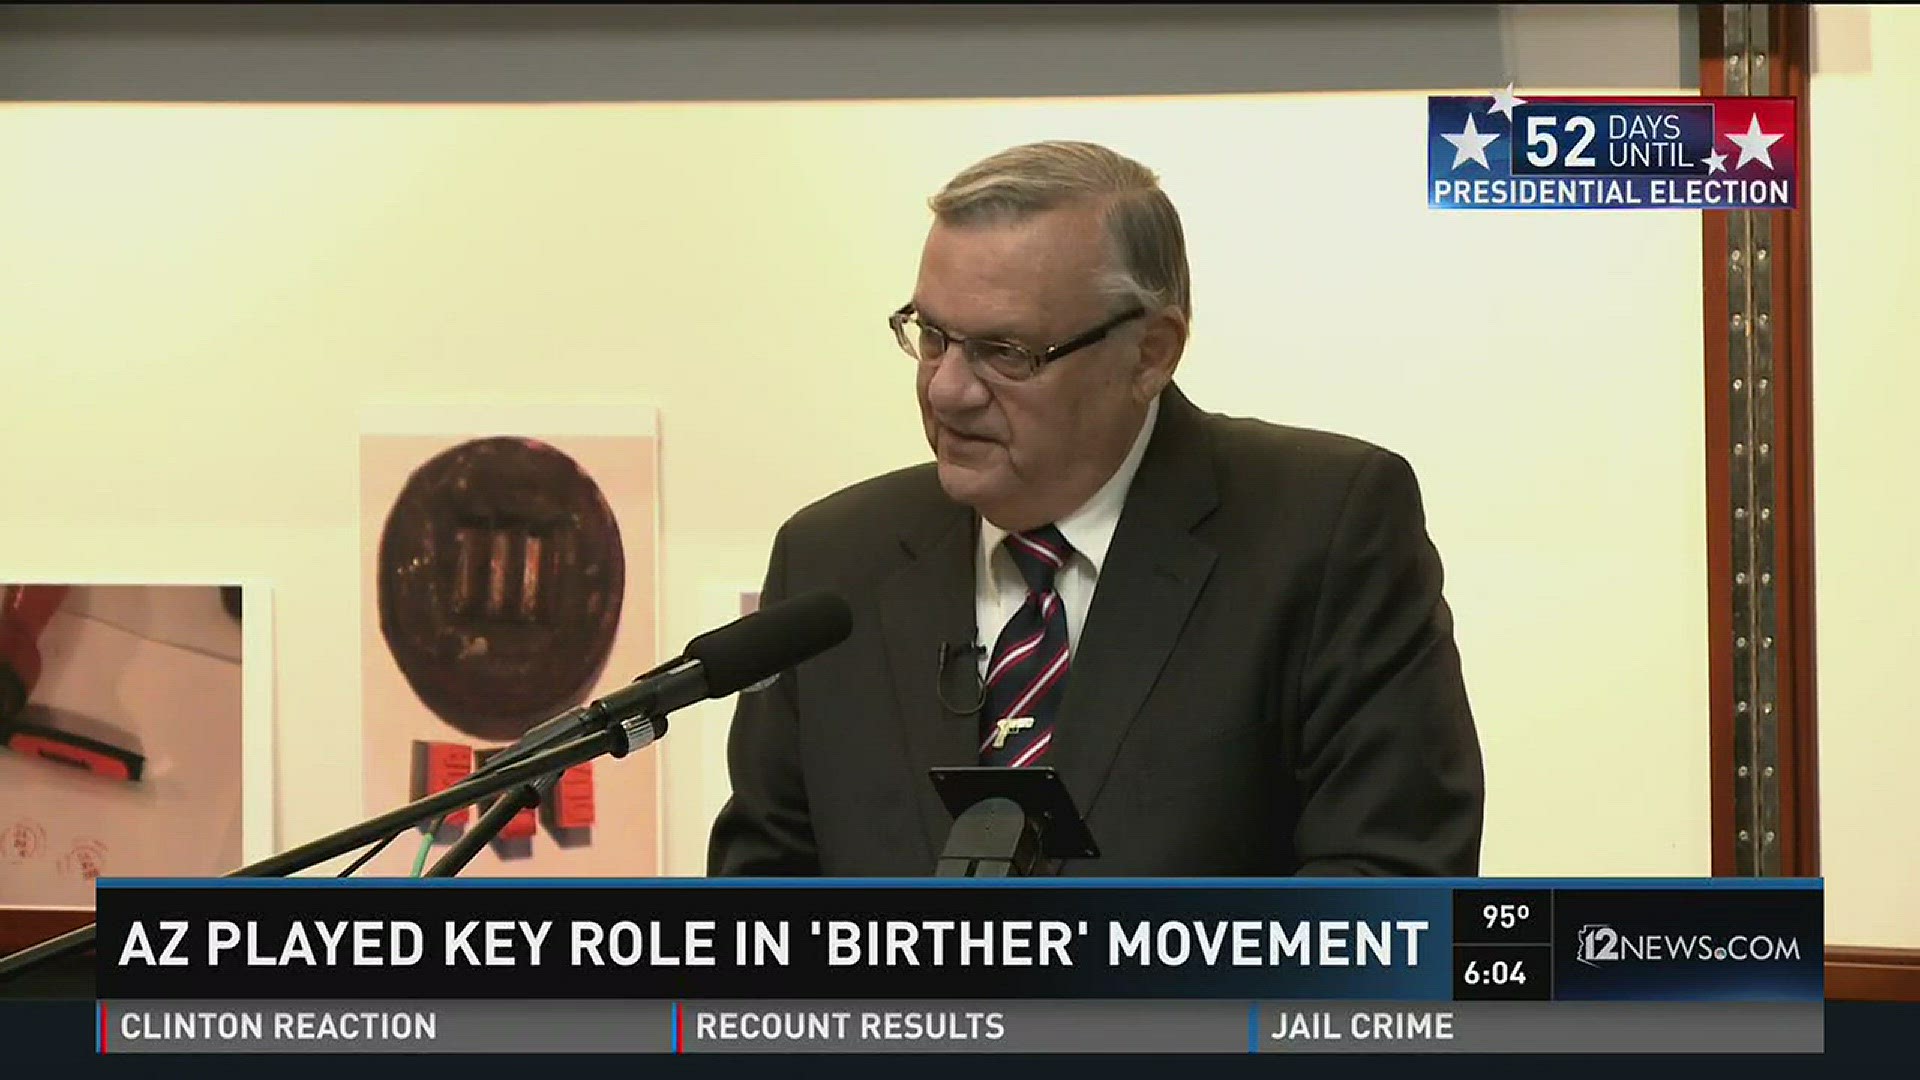 AZ played key role in 'birther' movement